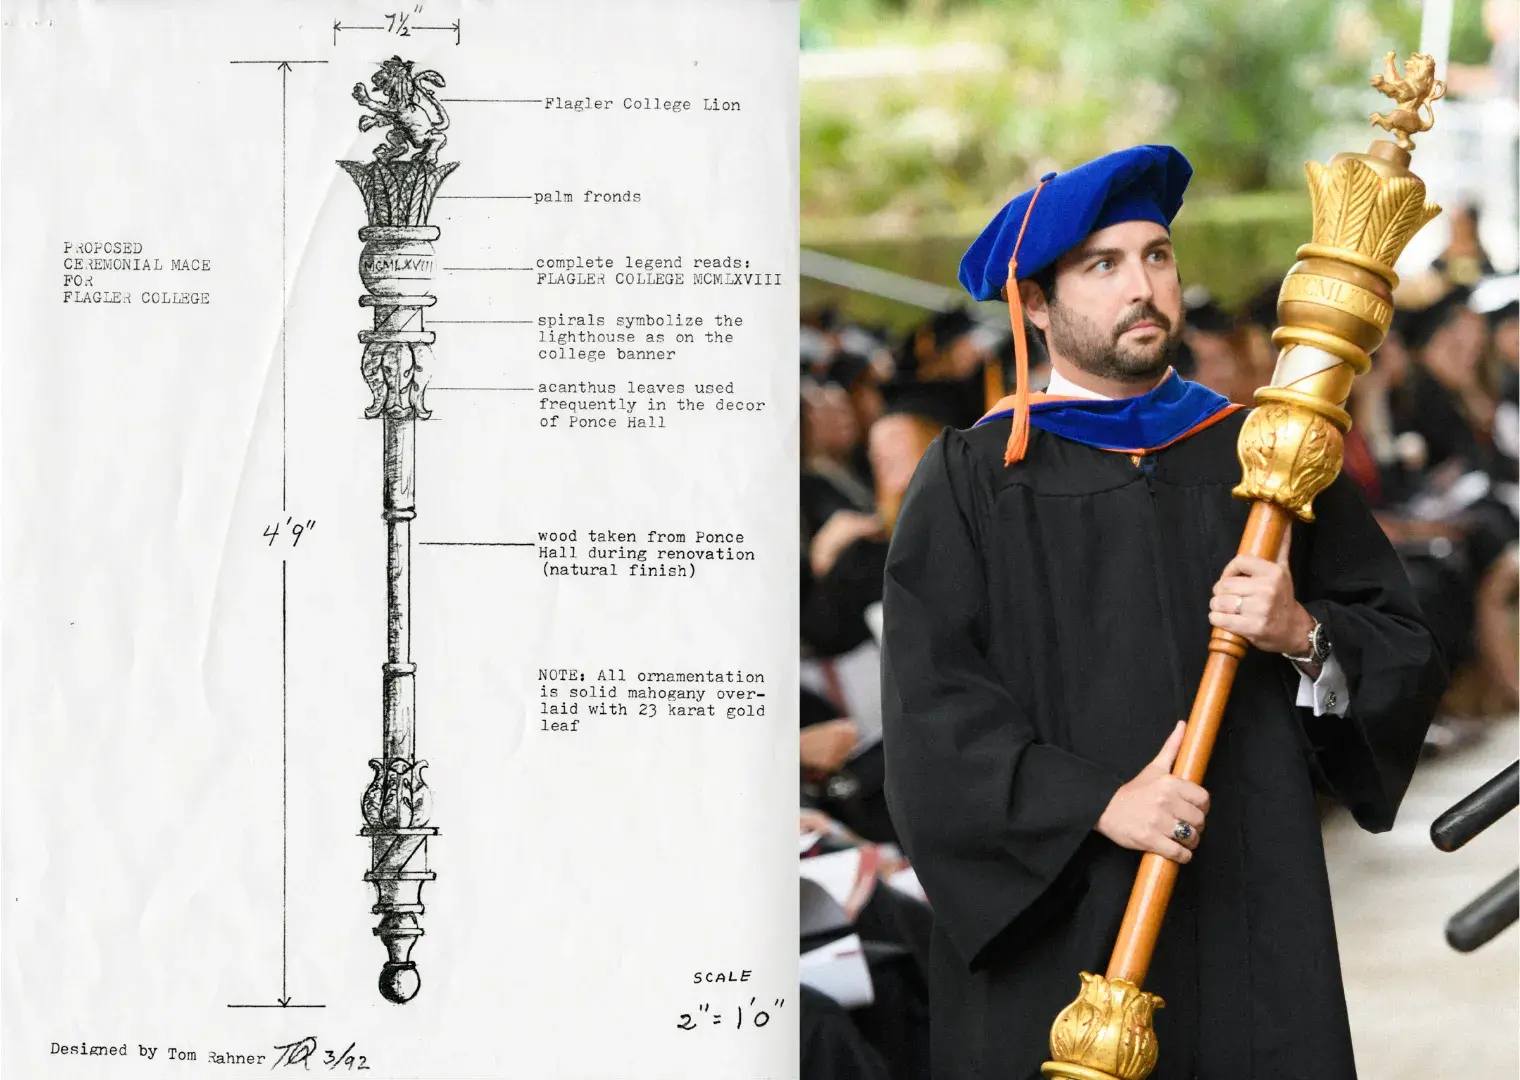 Original sketch of Mace conjoined with image of Professor Behl presenting it at a past Commencement.